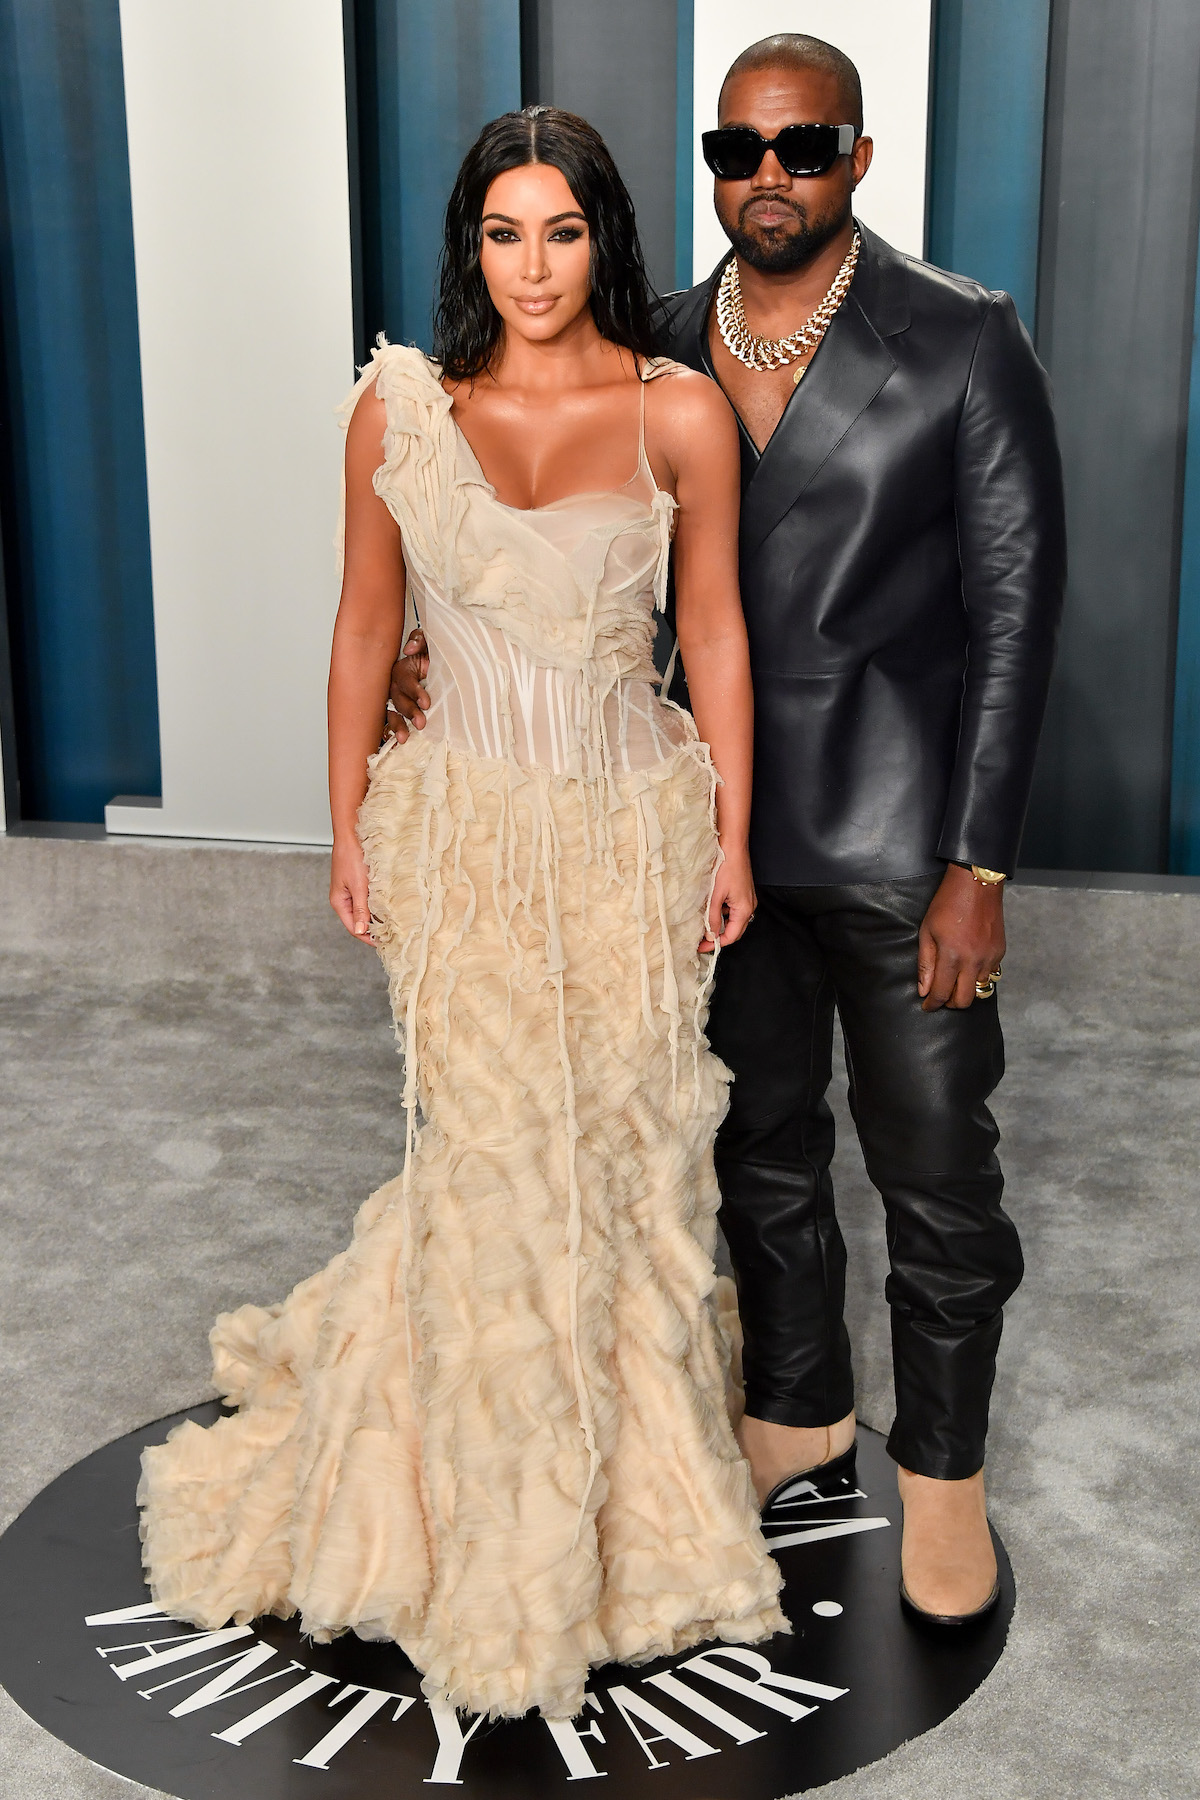 Kim Kardashian West poses in a long cream gown with her husband Kanye West at an event.